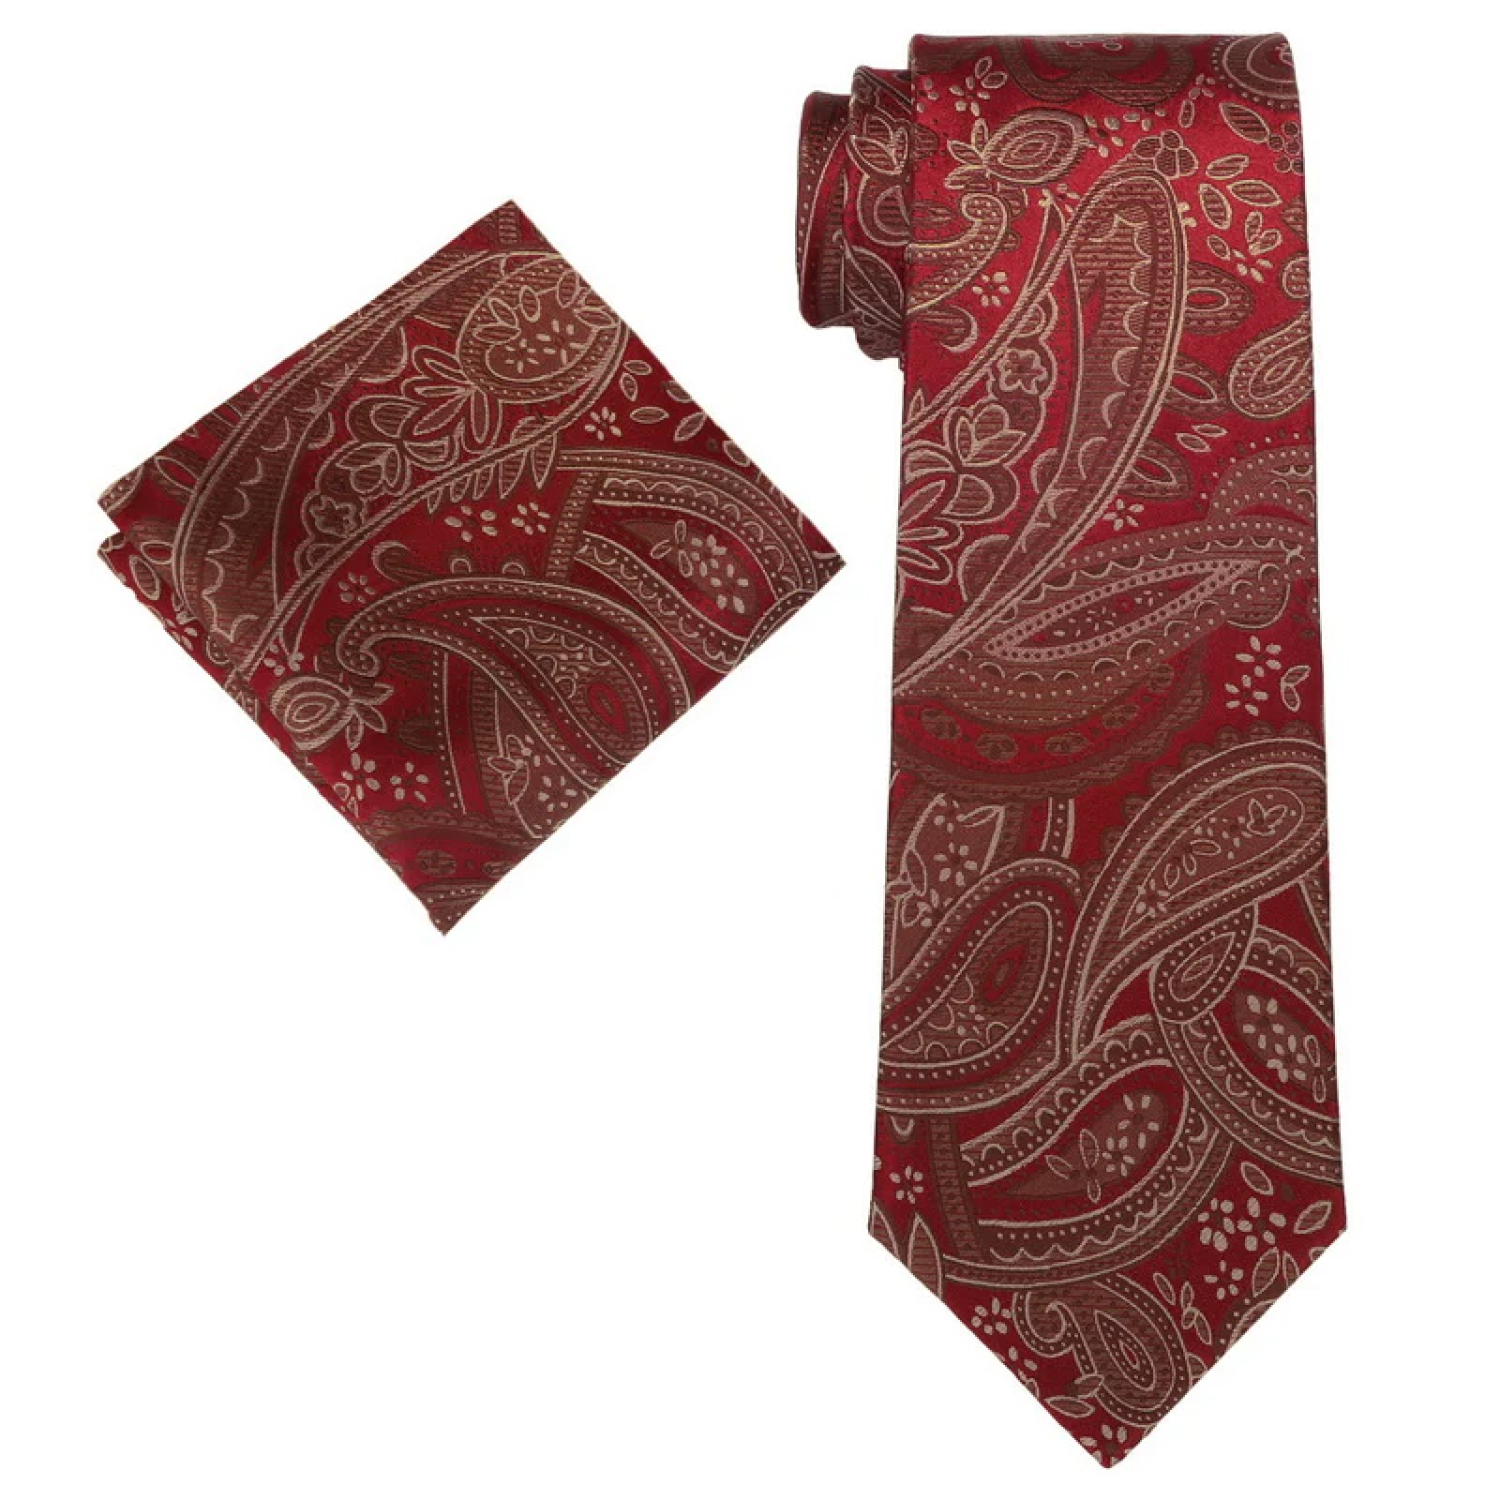 View 2: A Deep Red, Brown Paisley Pattern Silk Necktie, Matching Pocket Square